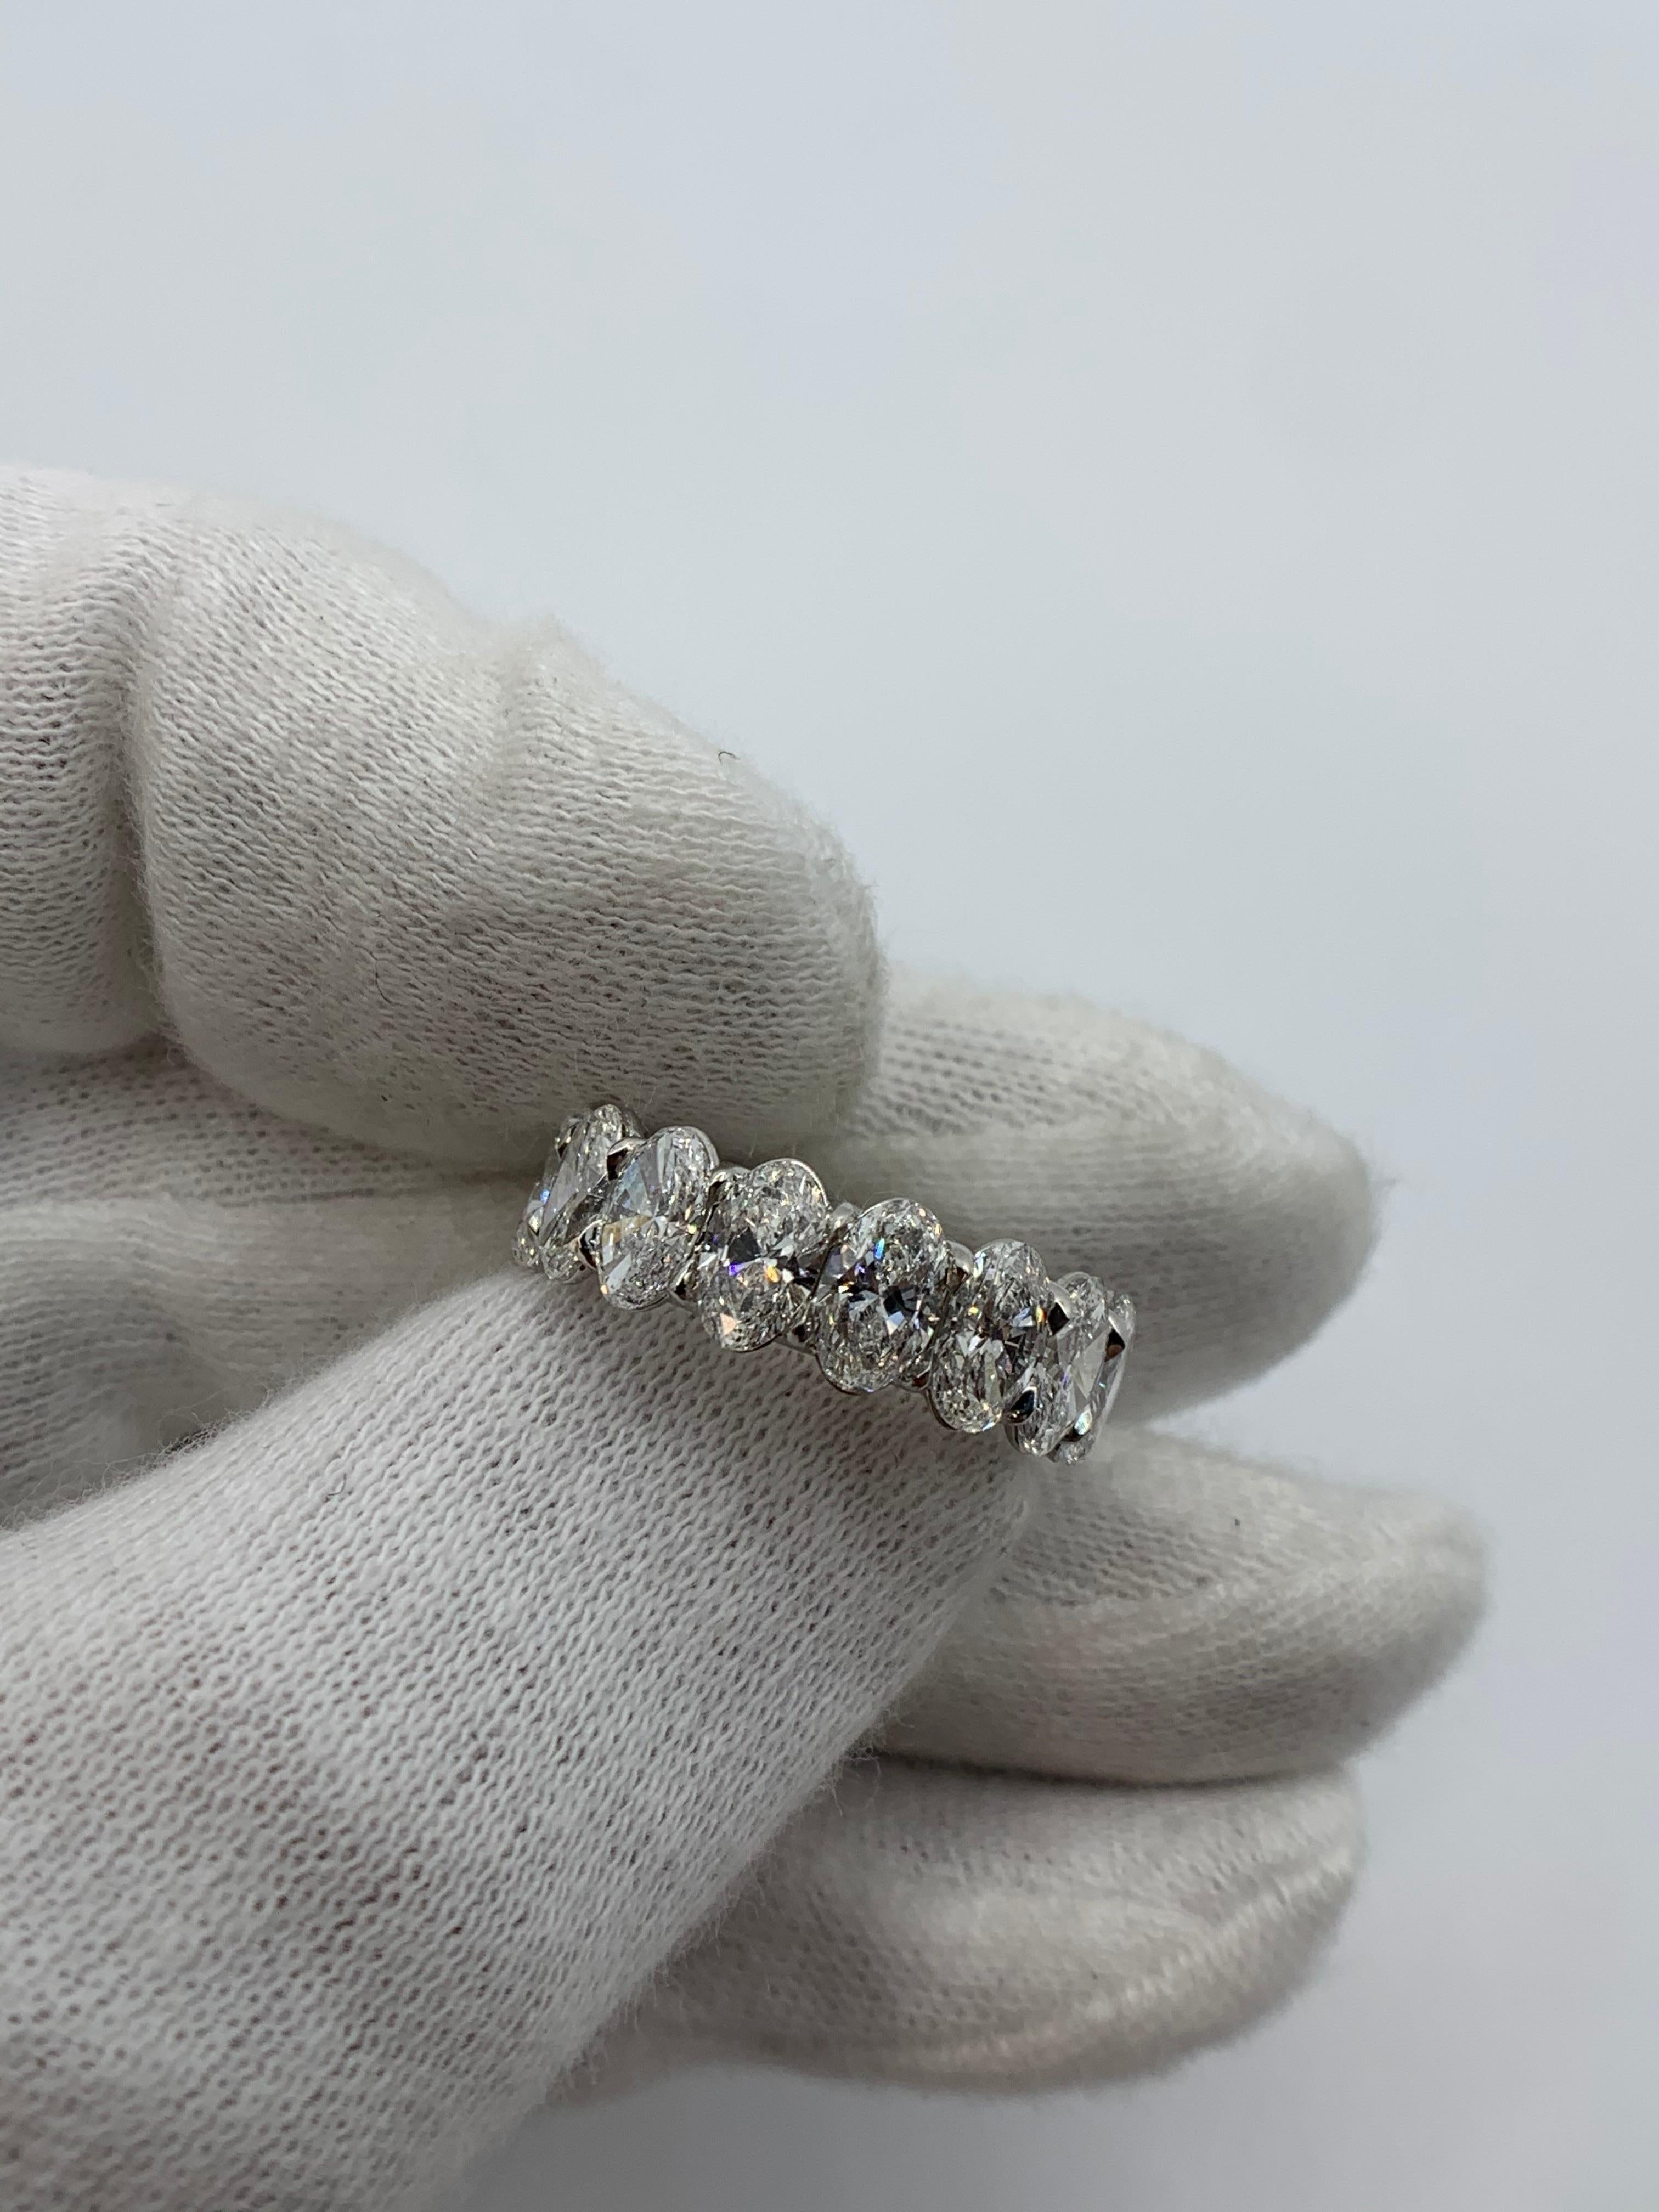 16 Perfectly matched and elongated Oval Cut Diamonds weighing a total of 6.48 Carats.
Each stone weighs over 40 points each.
Stones are DEF color and SI Clarity.
Every stone is certified by GIA.
Set in Platinum.
Size 6.